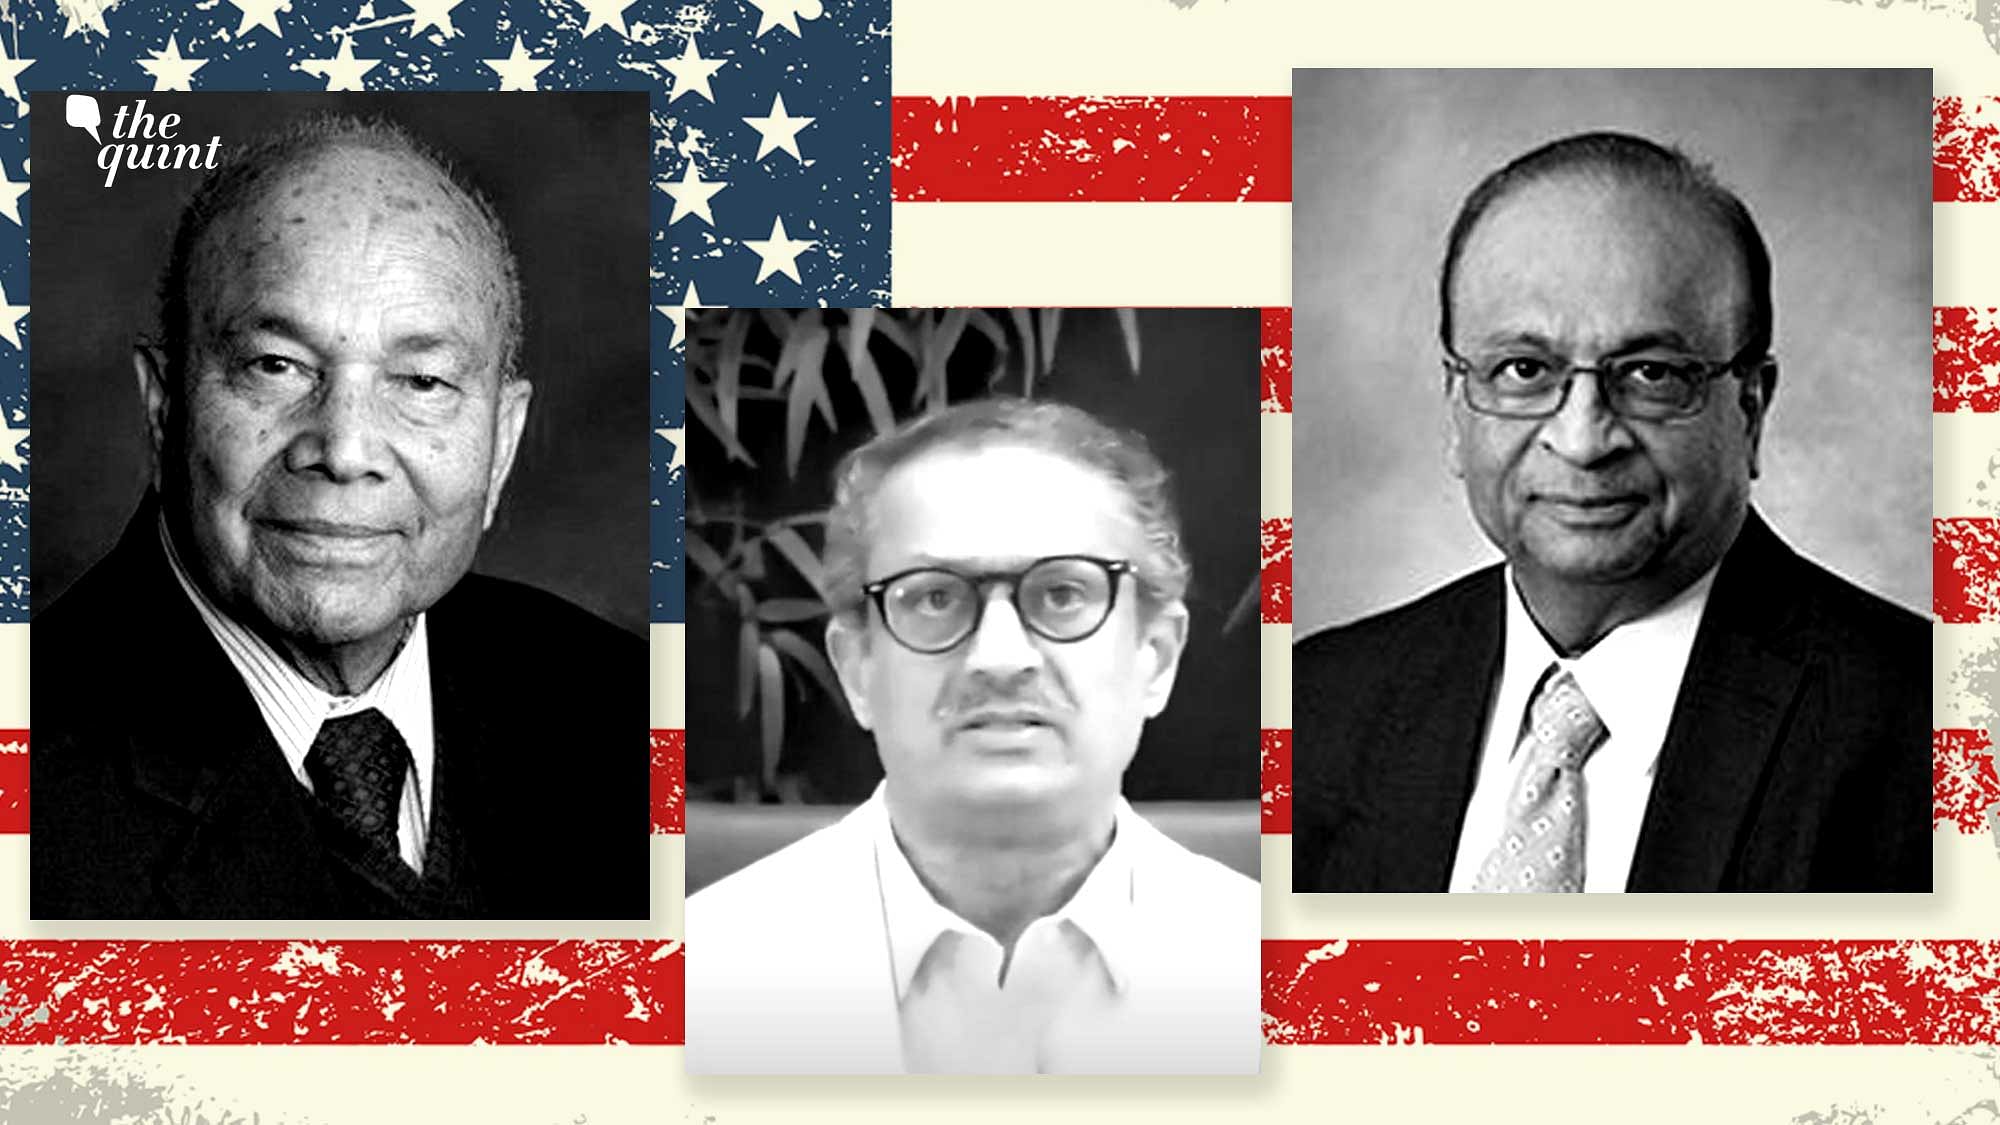 The Quint reached out to Padma Bhushan Awardee and Thompson G Marsh Professor of Law Ved Nanda, oncologist and community activist Dr Bharat Barai, and former trustee of the American India Foundation and CEO of Almax Ravi Tilak, to understand the pulse of our Indian community in America, ahead of the Presidential Polls in the US.